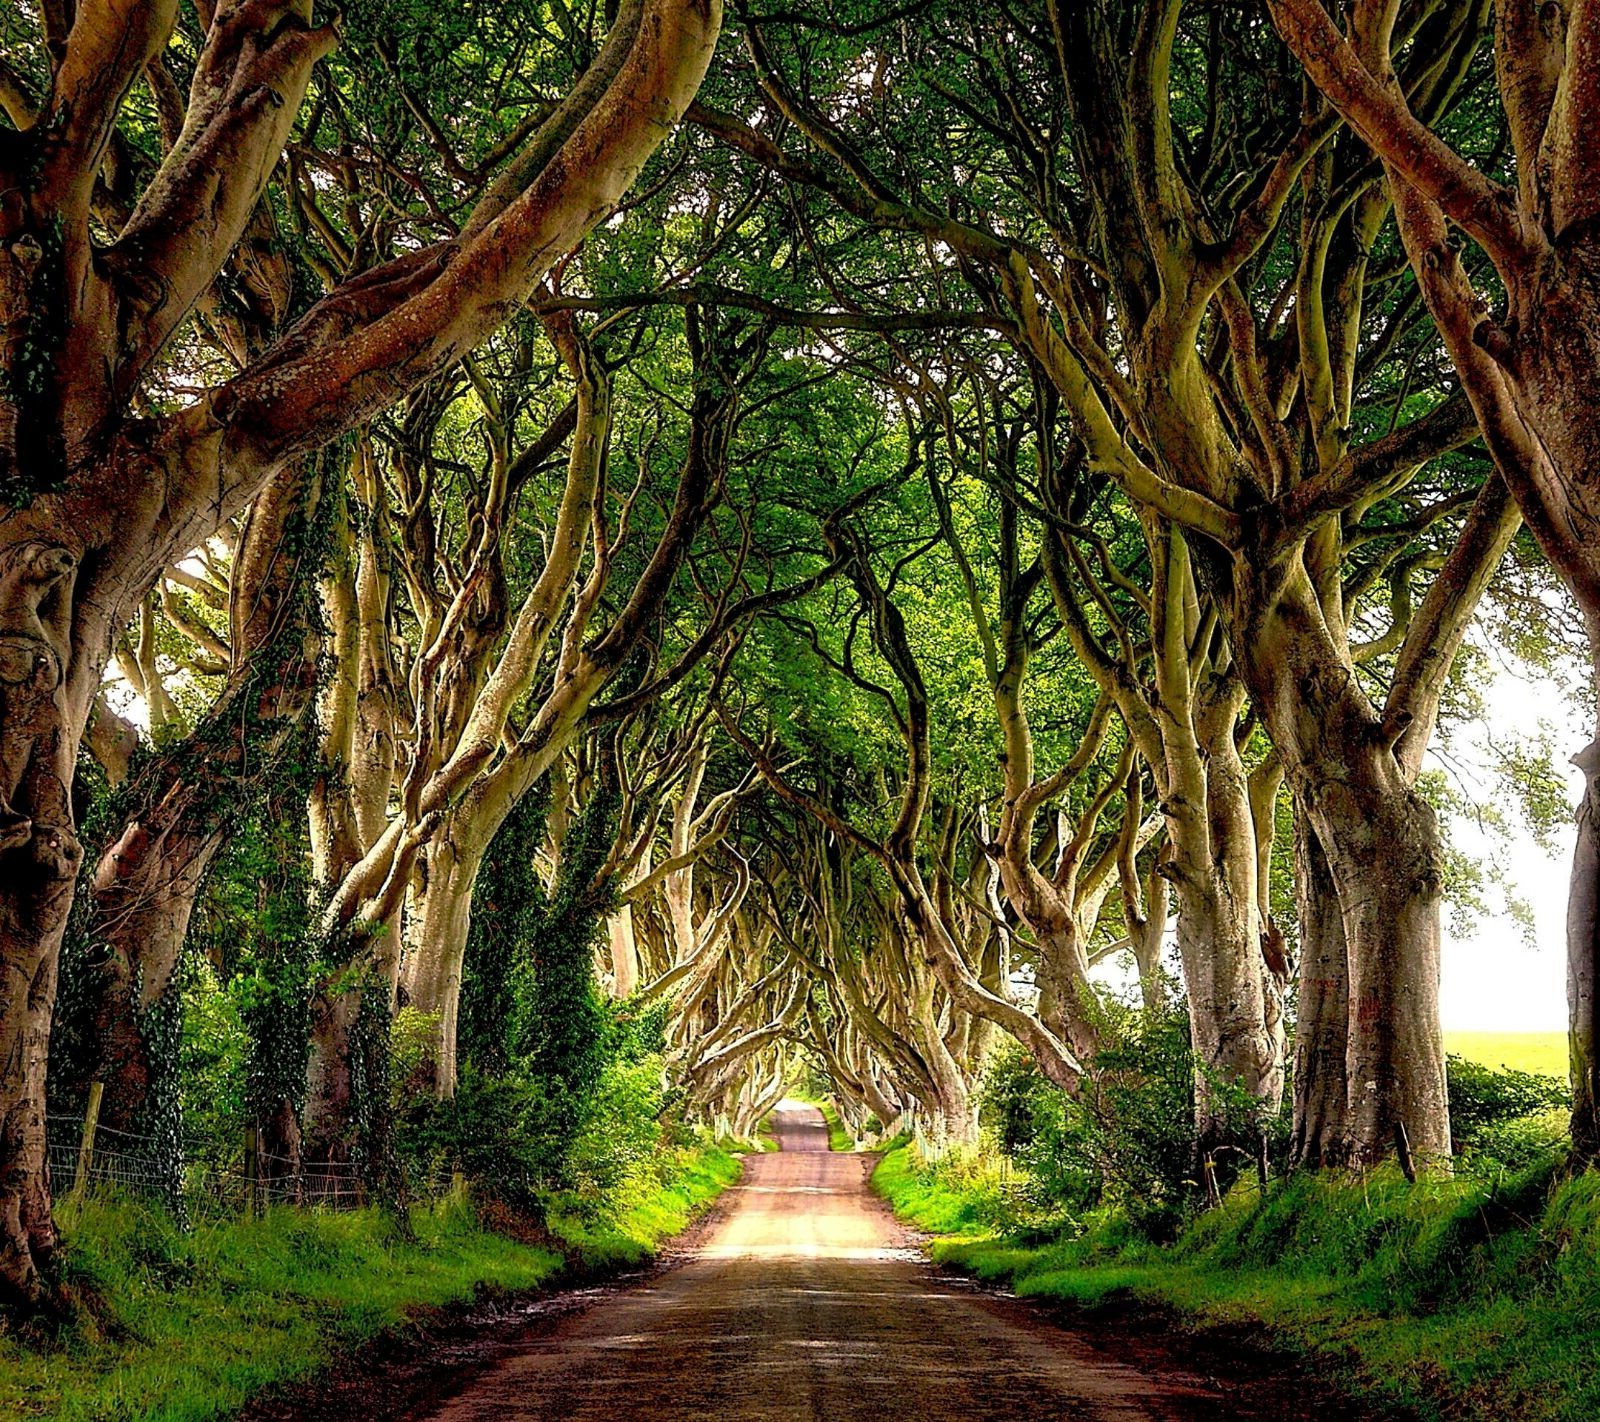 Tree-Lined Road in Ireland